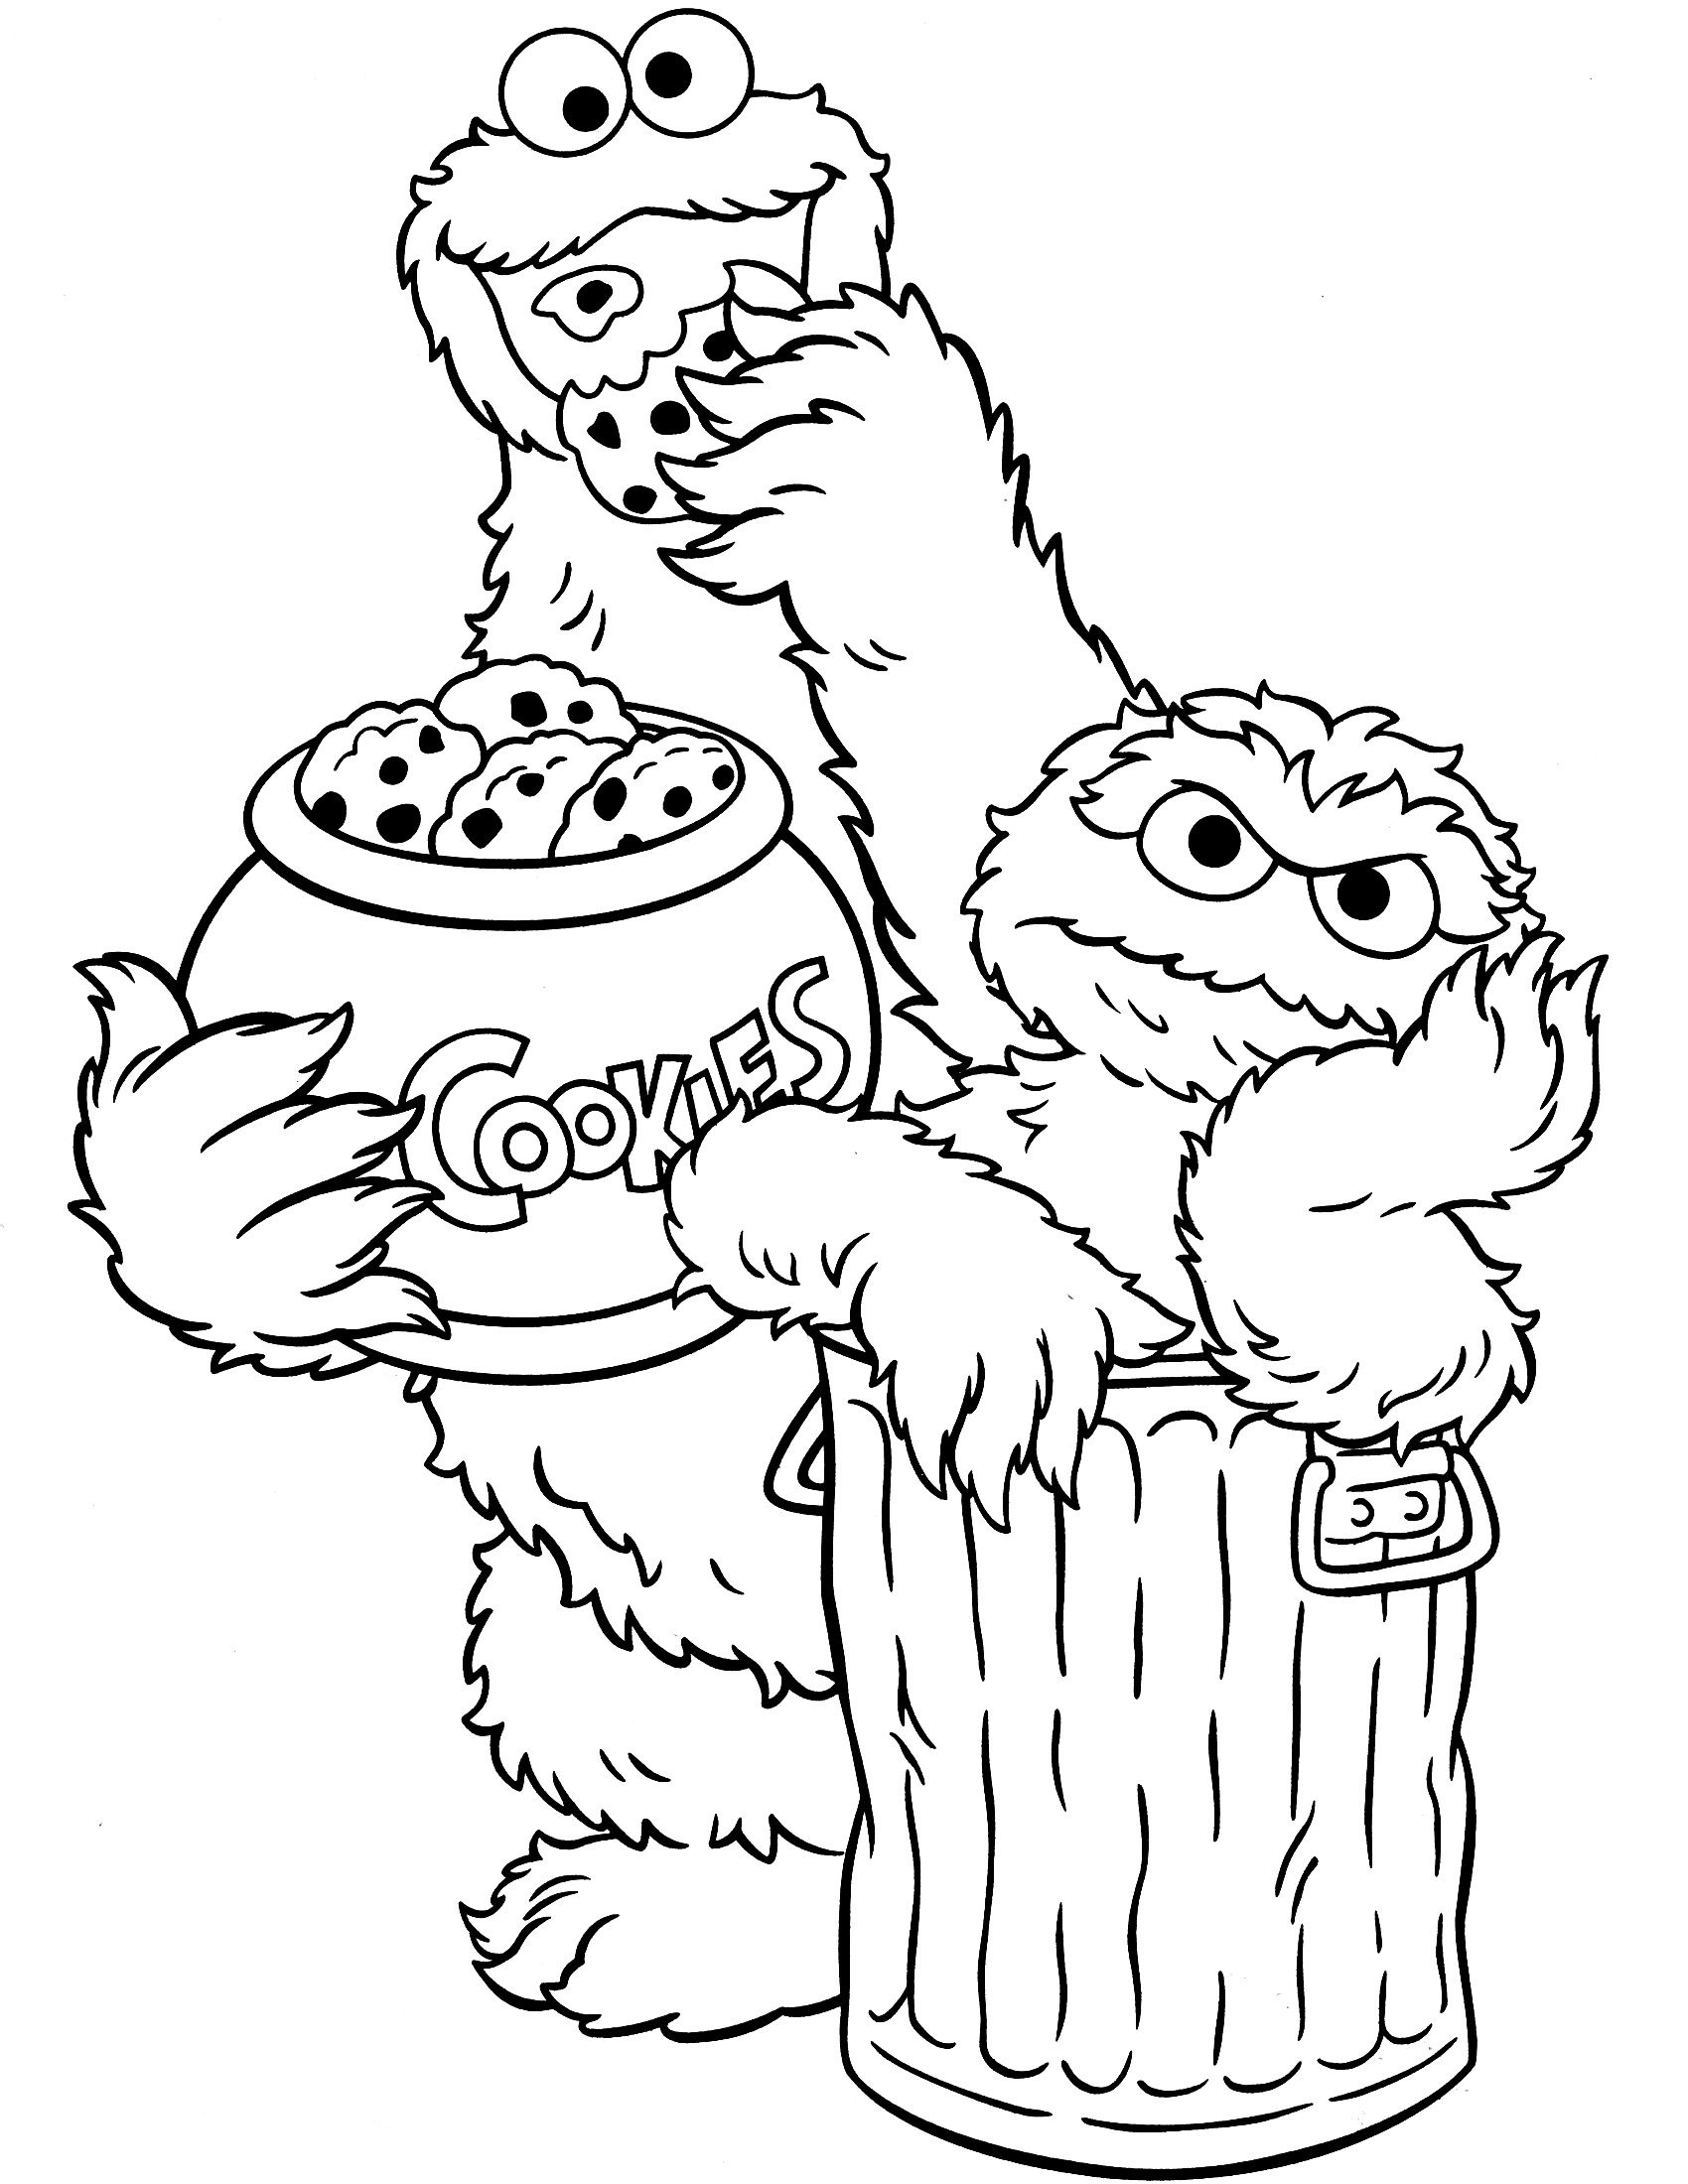 Sesame Street Coloring Pages - Google Search | Seseme Party | Sesame - Free Printable Coloring Pages Sesame Street Characters